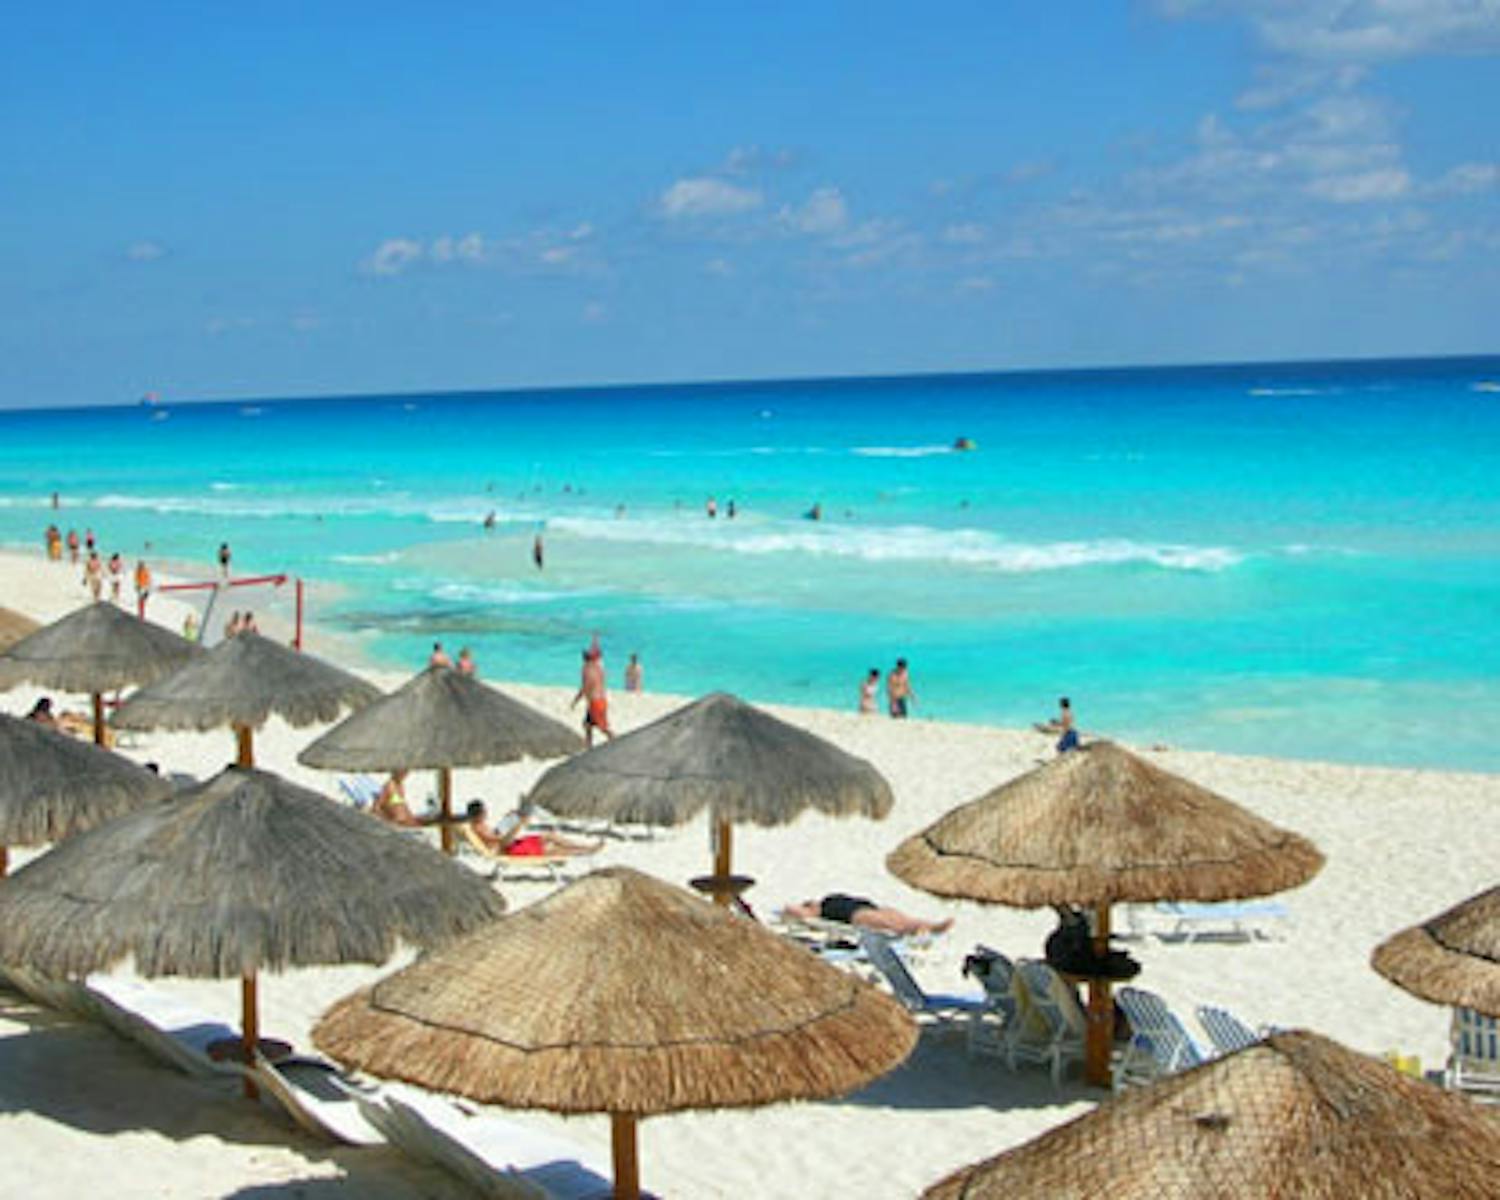 As stereotypical as a trip to Cancun in college sounds, it's still a great Spring Break locale.